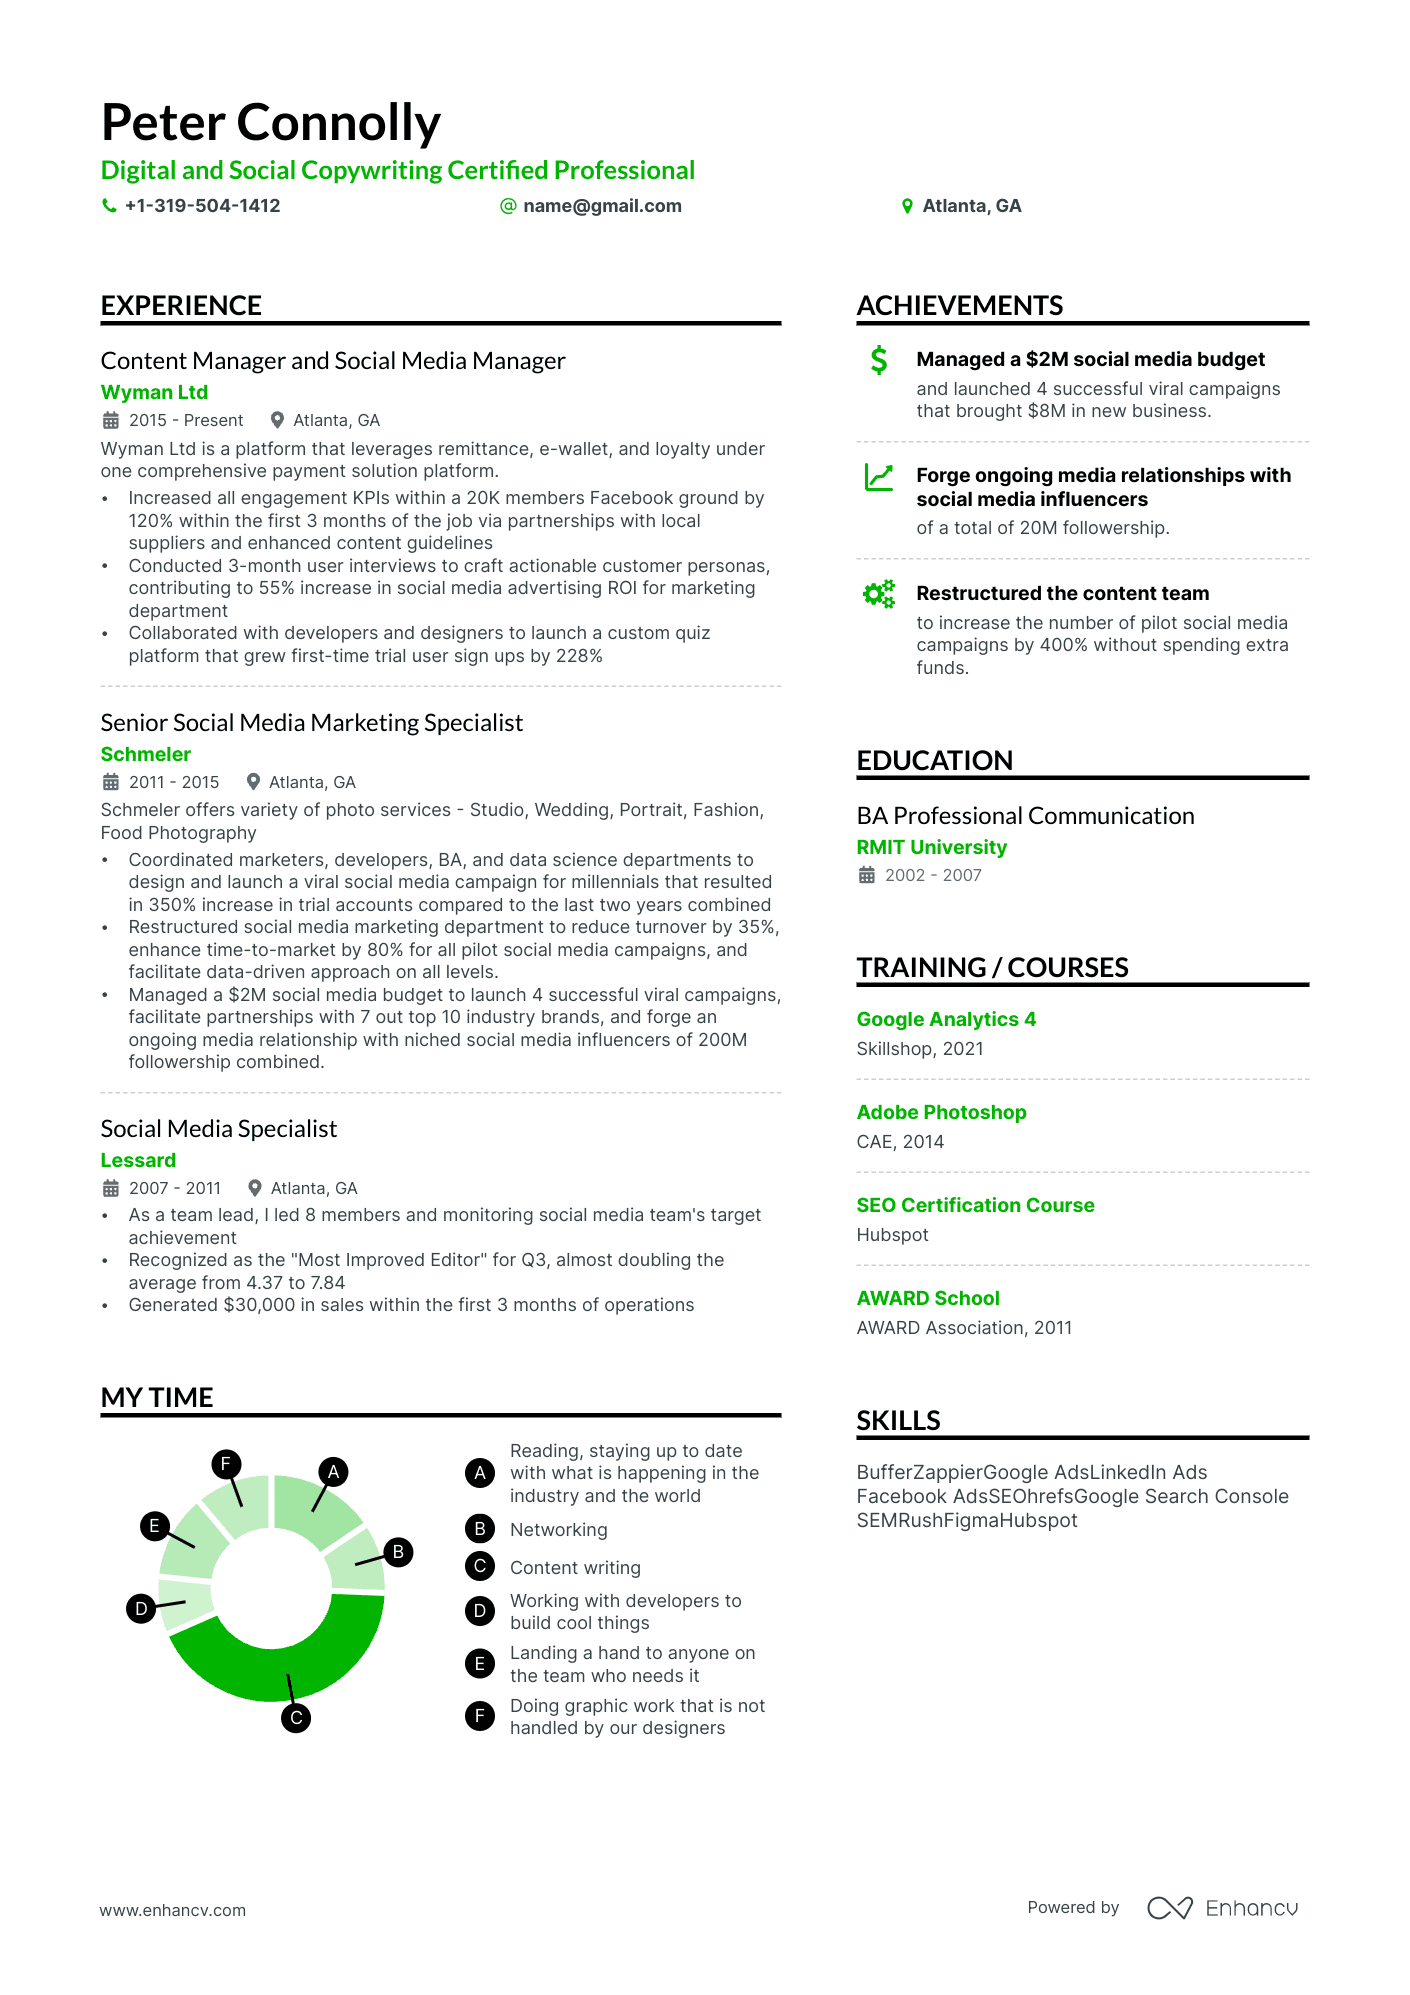 Digital and Social Copywriting Certified Professional resume example